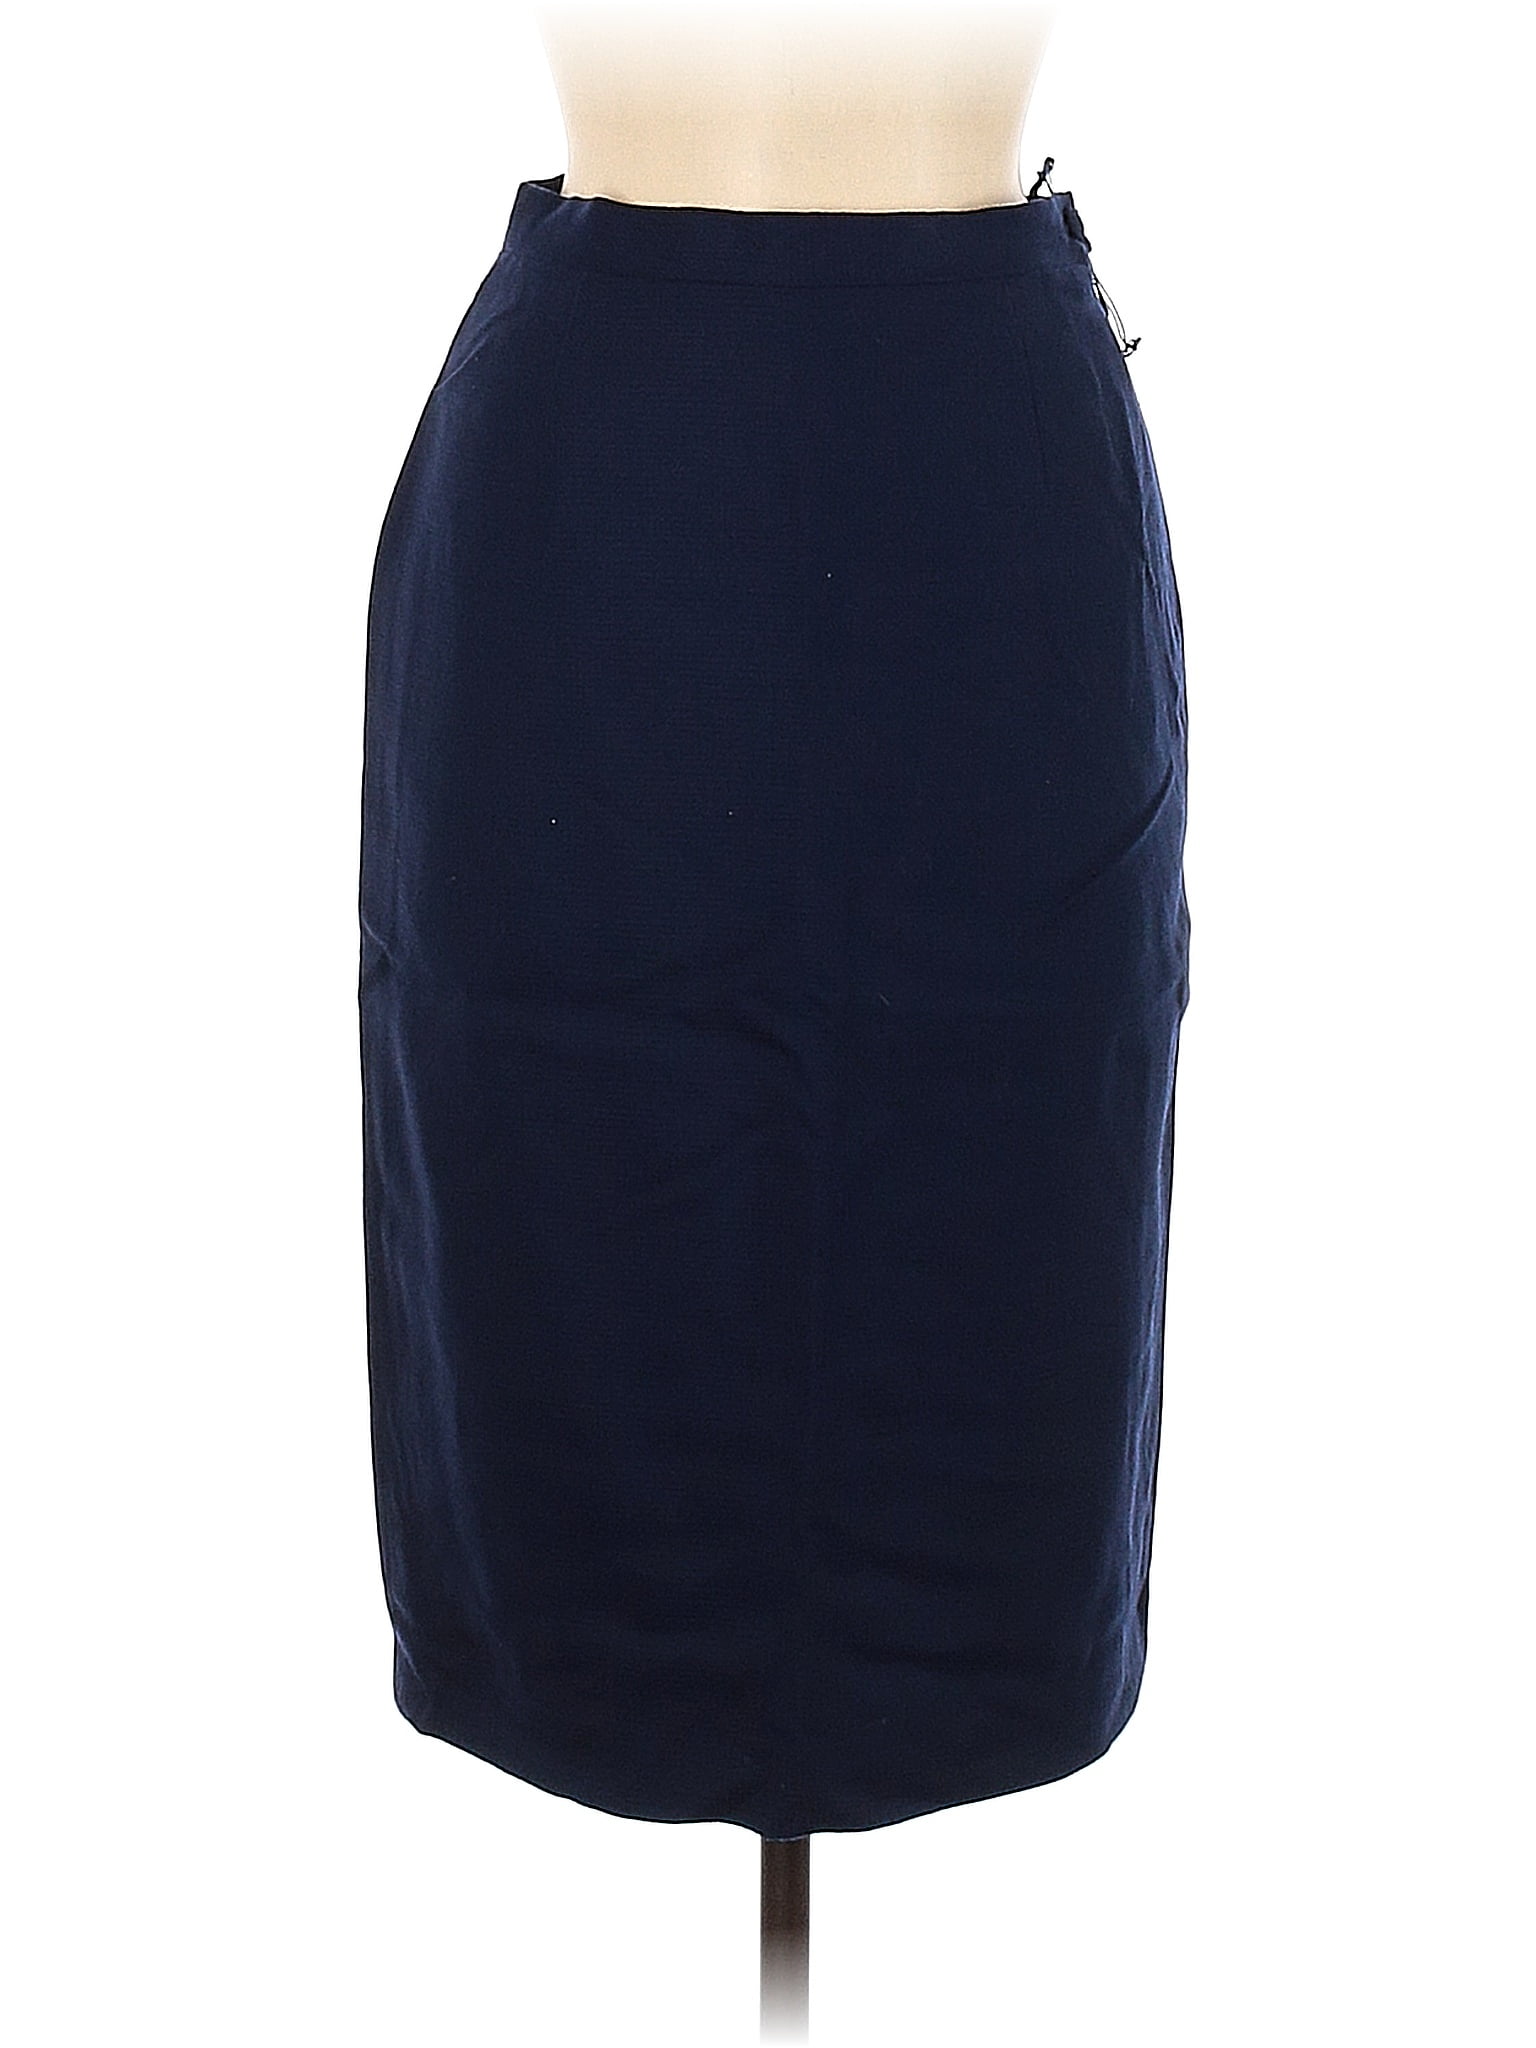 Burberry Solid Navy Blue Vintage Casual Skirt Size 42 (EU) - 70% off ...